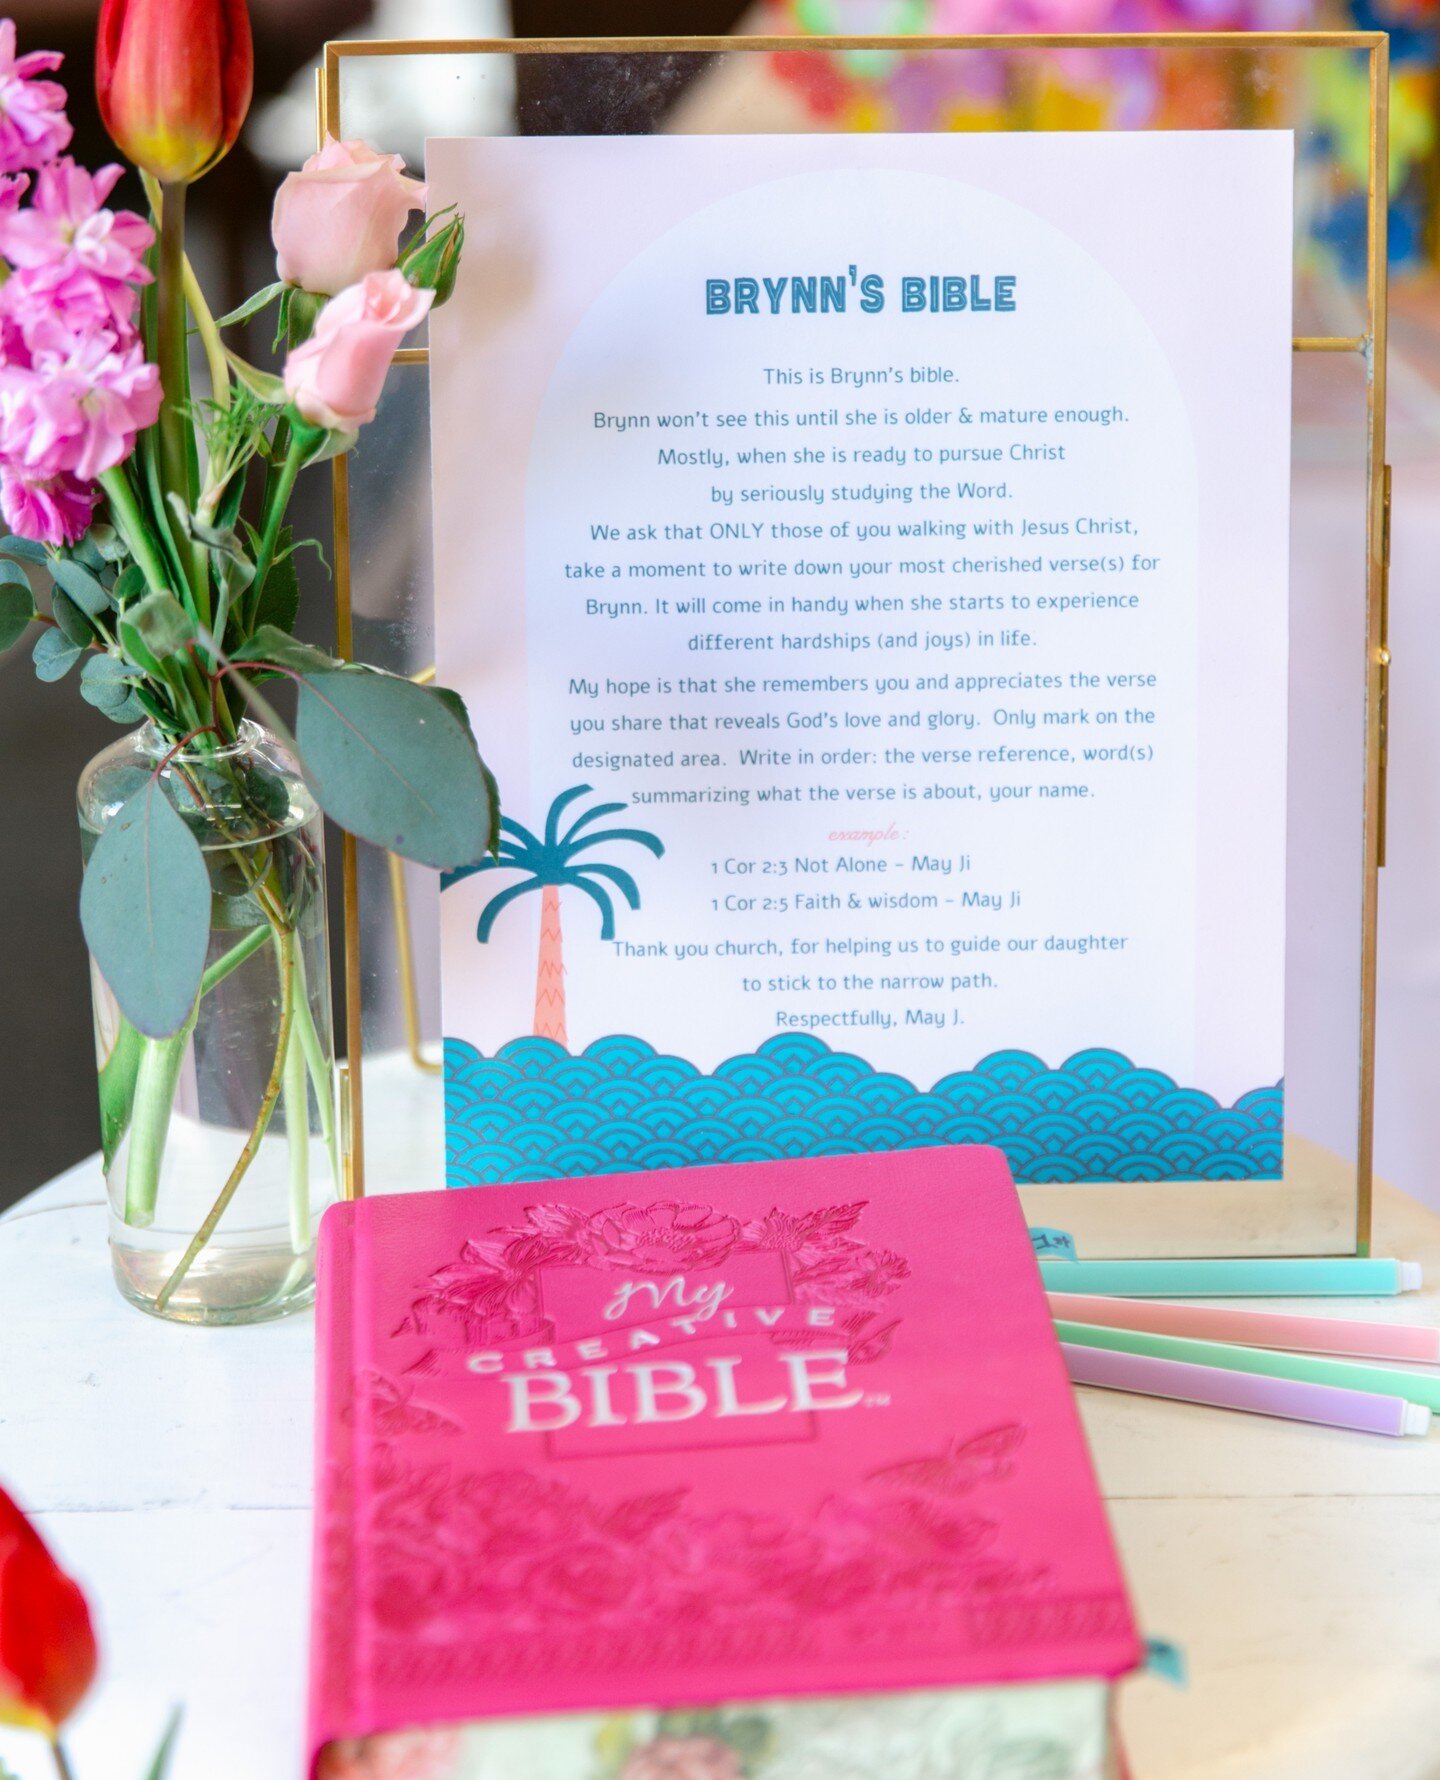 Creating cherished memories for Brynn's future journey, guests participated in heartwarming activities. A creative bible filled with their favorite verses was prepared, offering wisdom and inspiration for Brynn's future. A time capsule was also set o